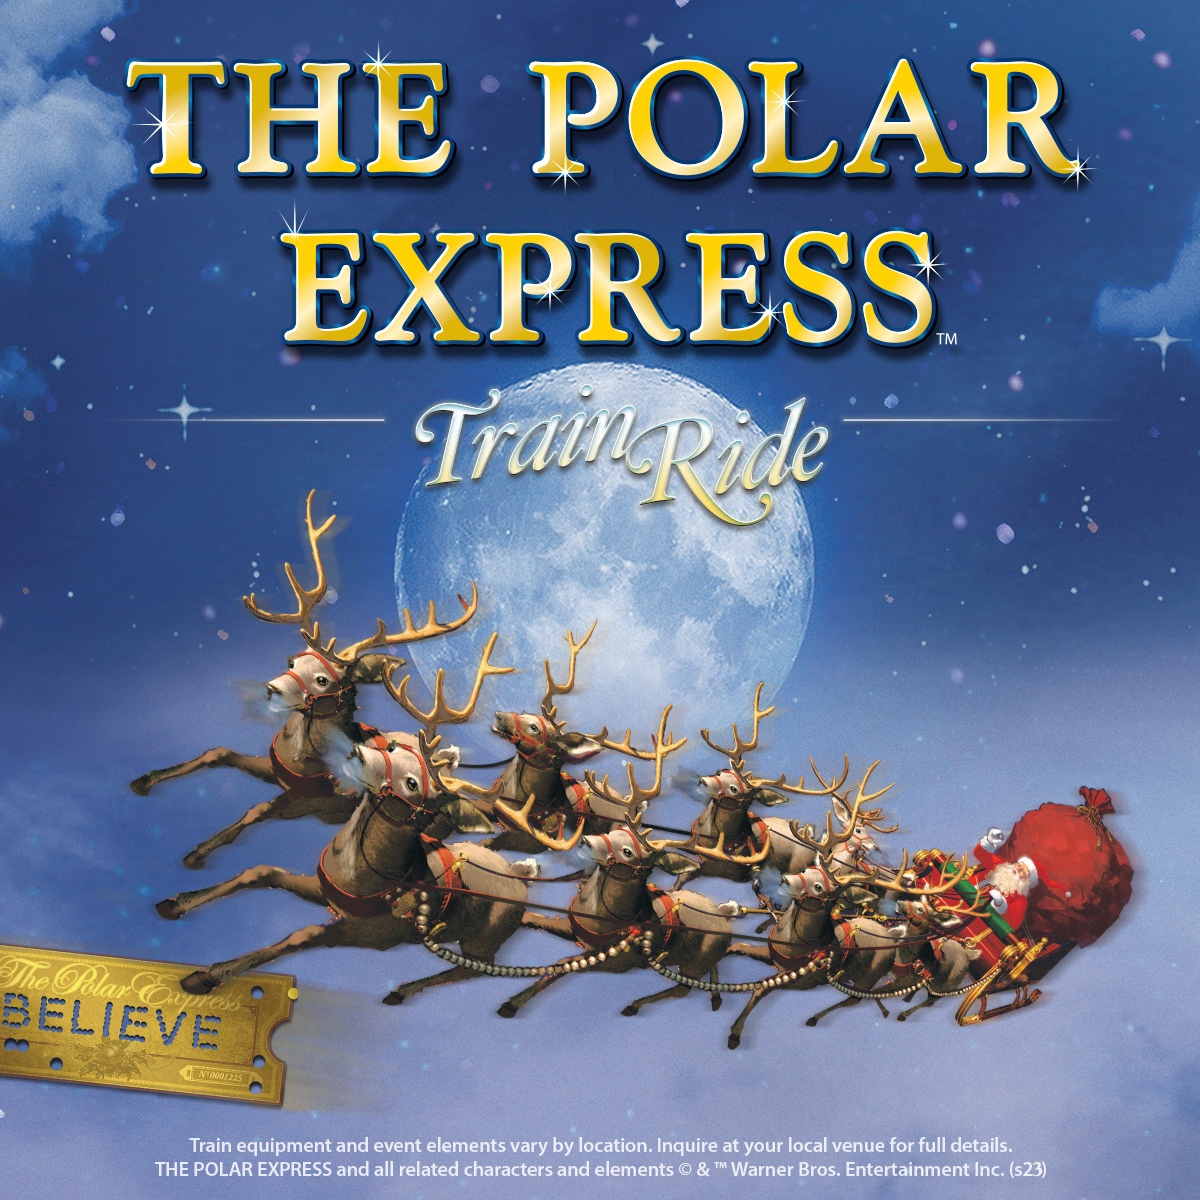 Official the Polar Express Train Ride Picture of santa with sleigh underneath starry sky